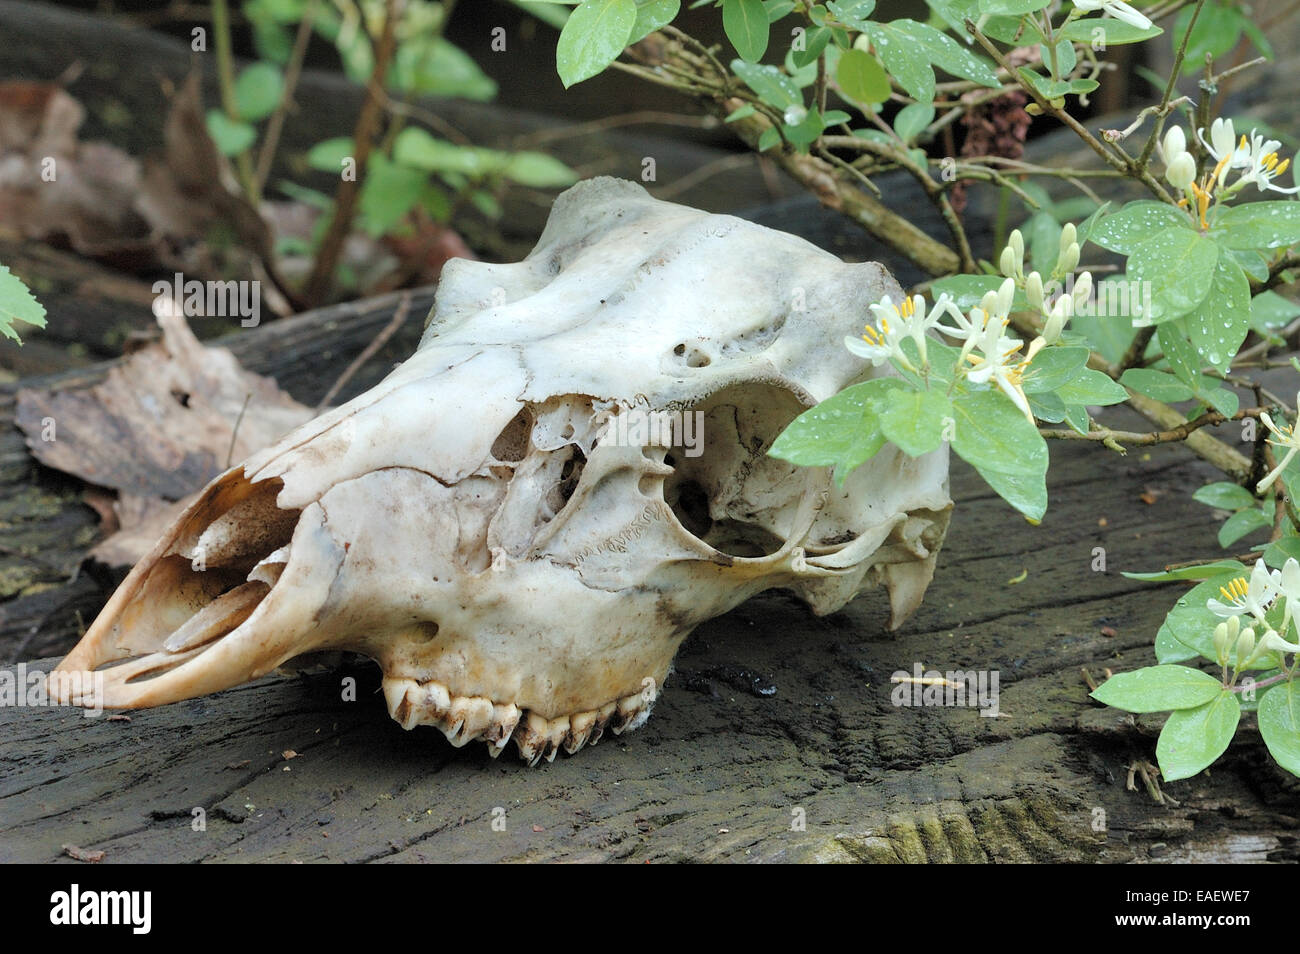 A whitetail deer skull found after the winter thaw. Stock Photo